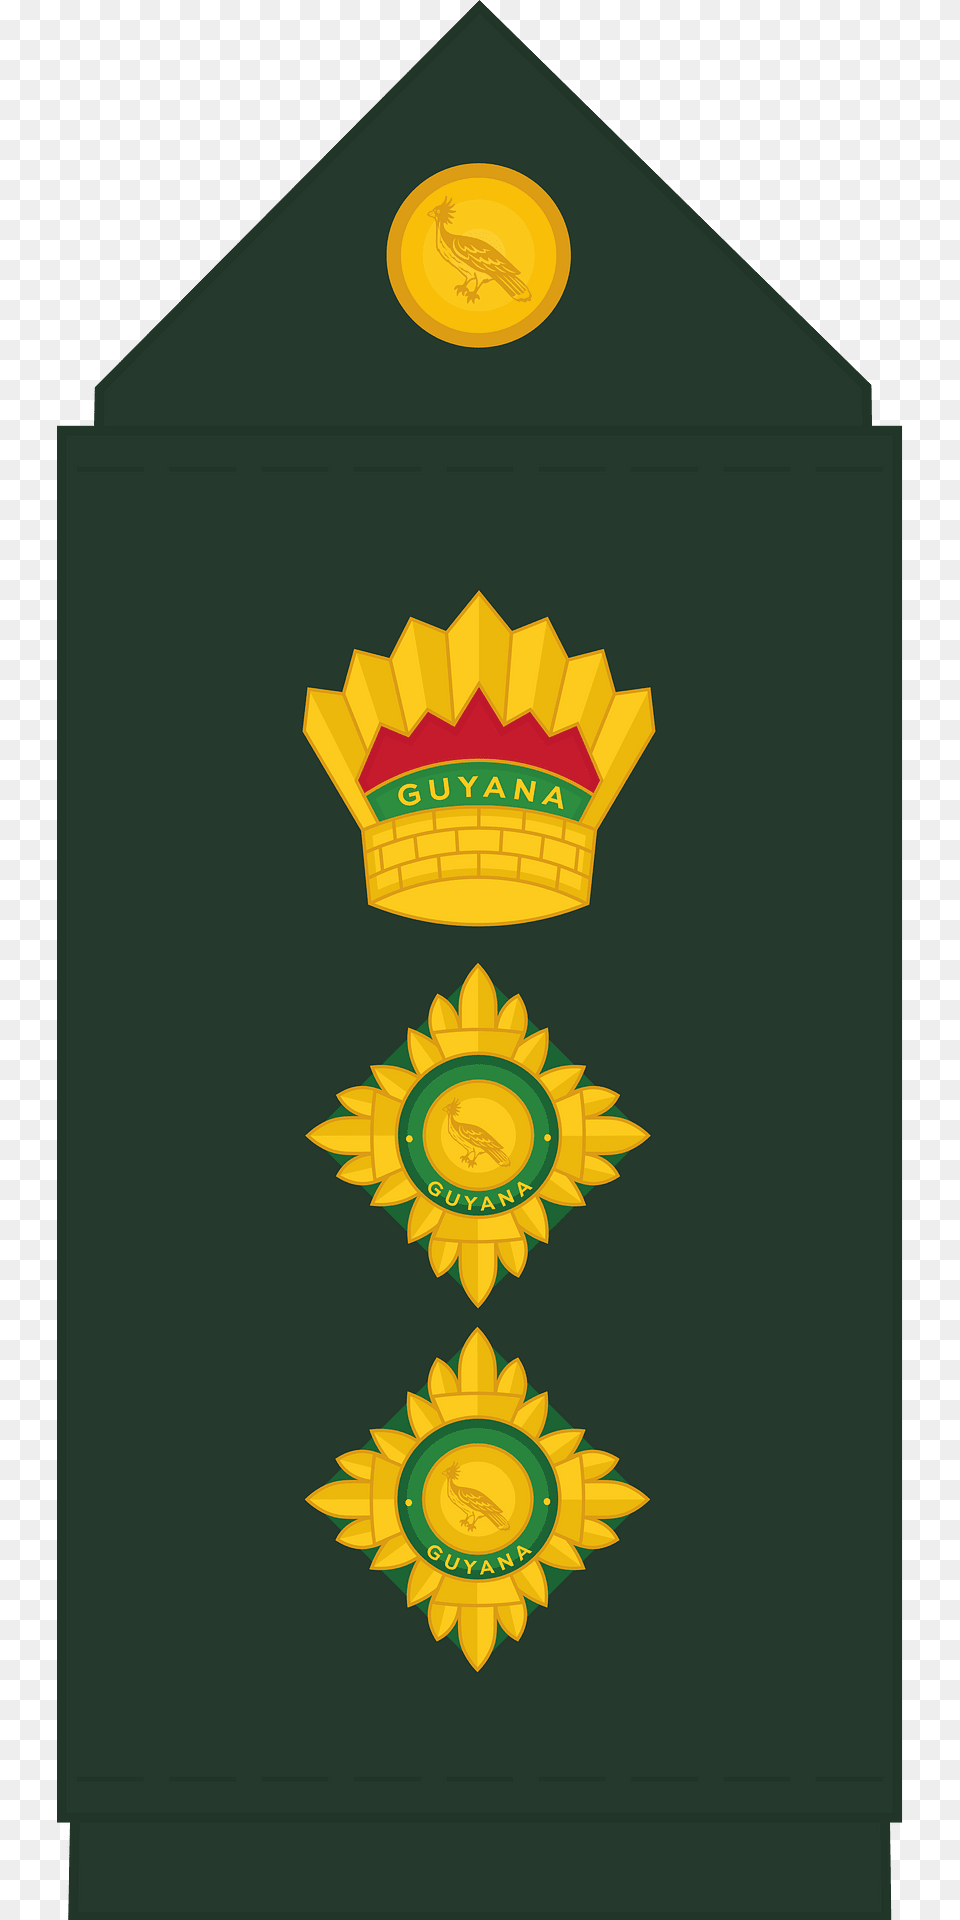 Guyana Defence Force Gdf Colonel Rank Insignia Clipart, Badge, Logo, Symbol, Flower Png